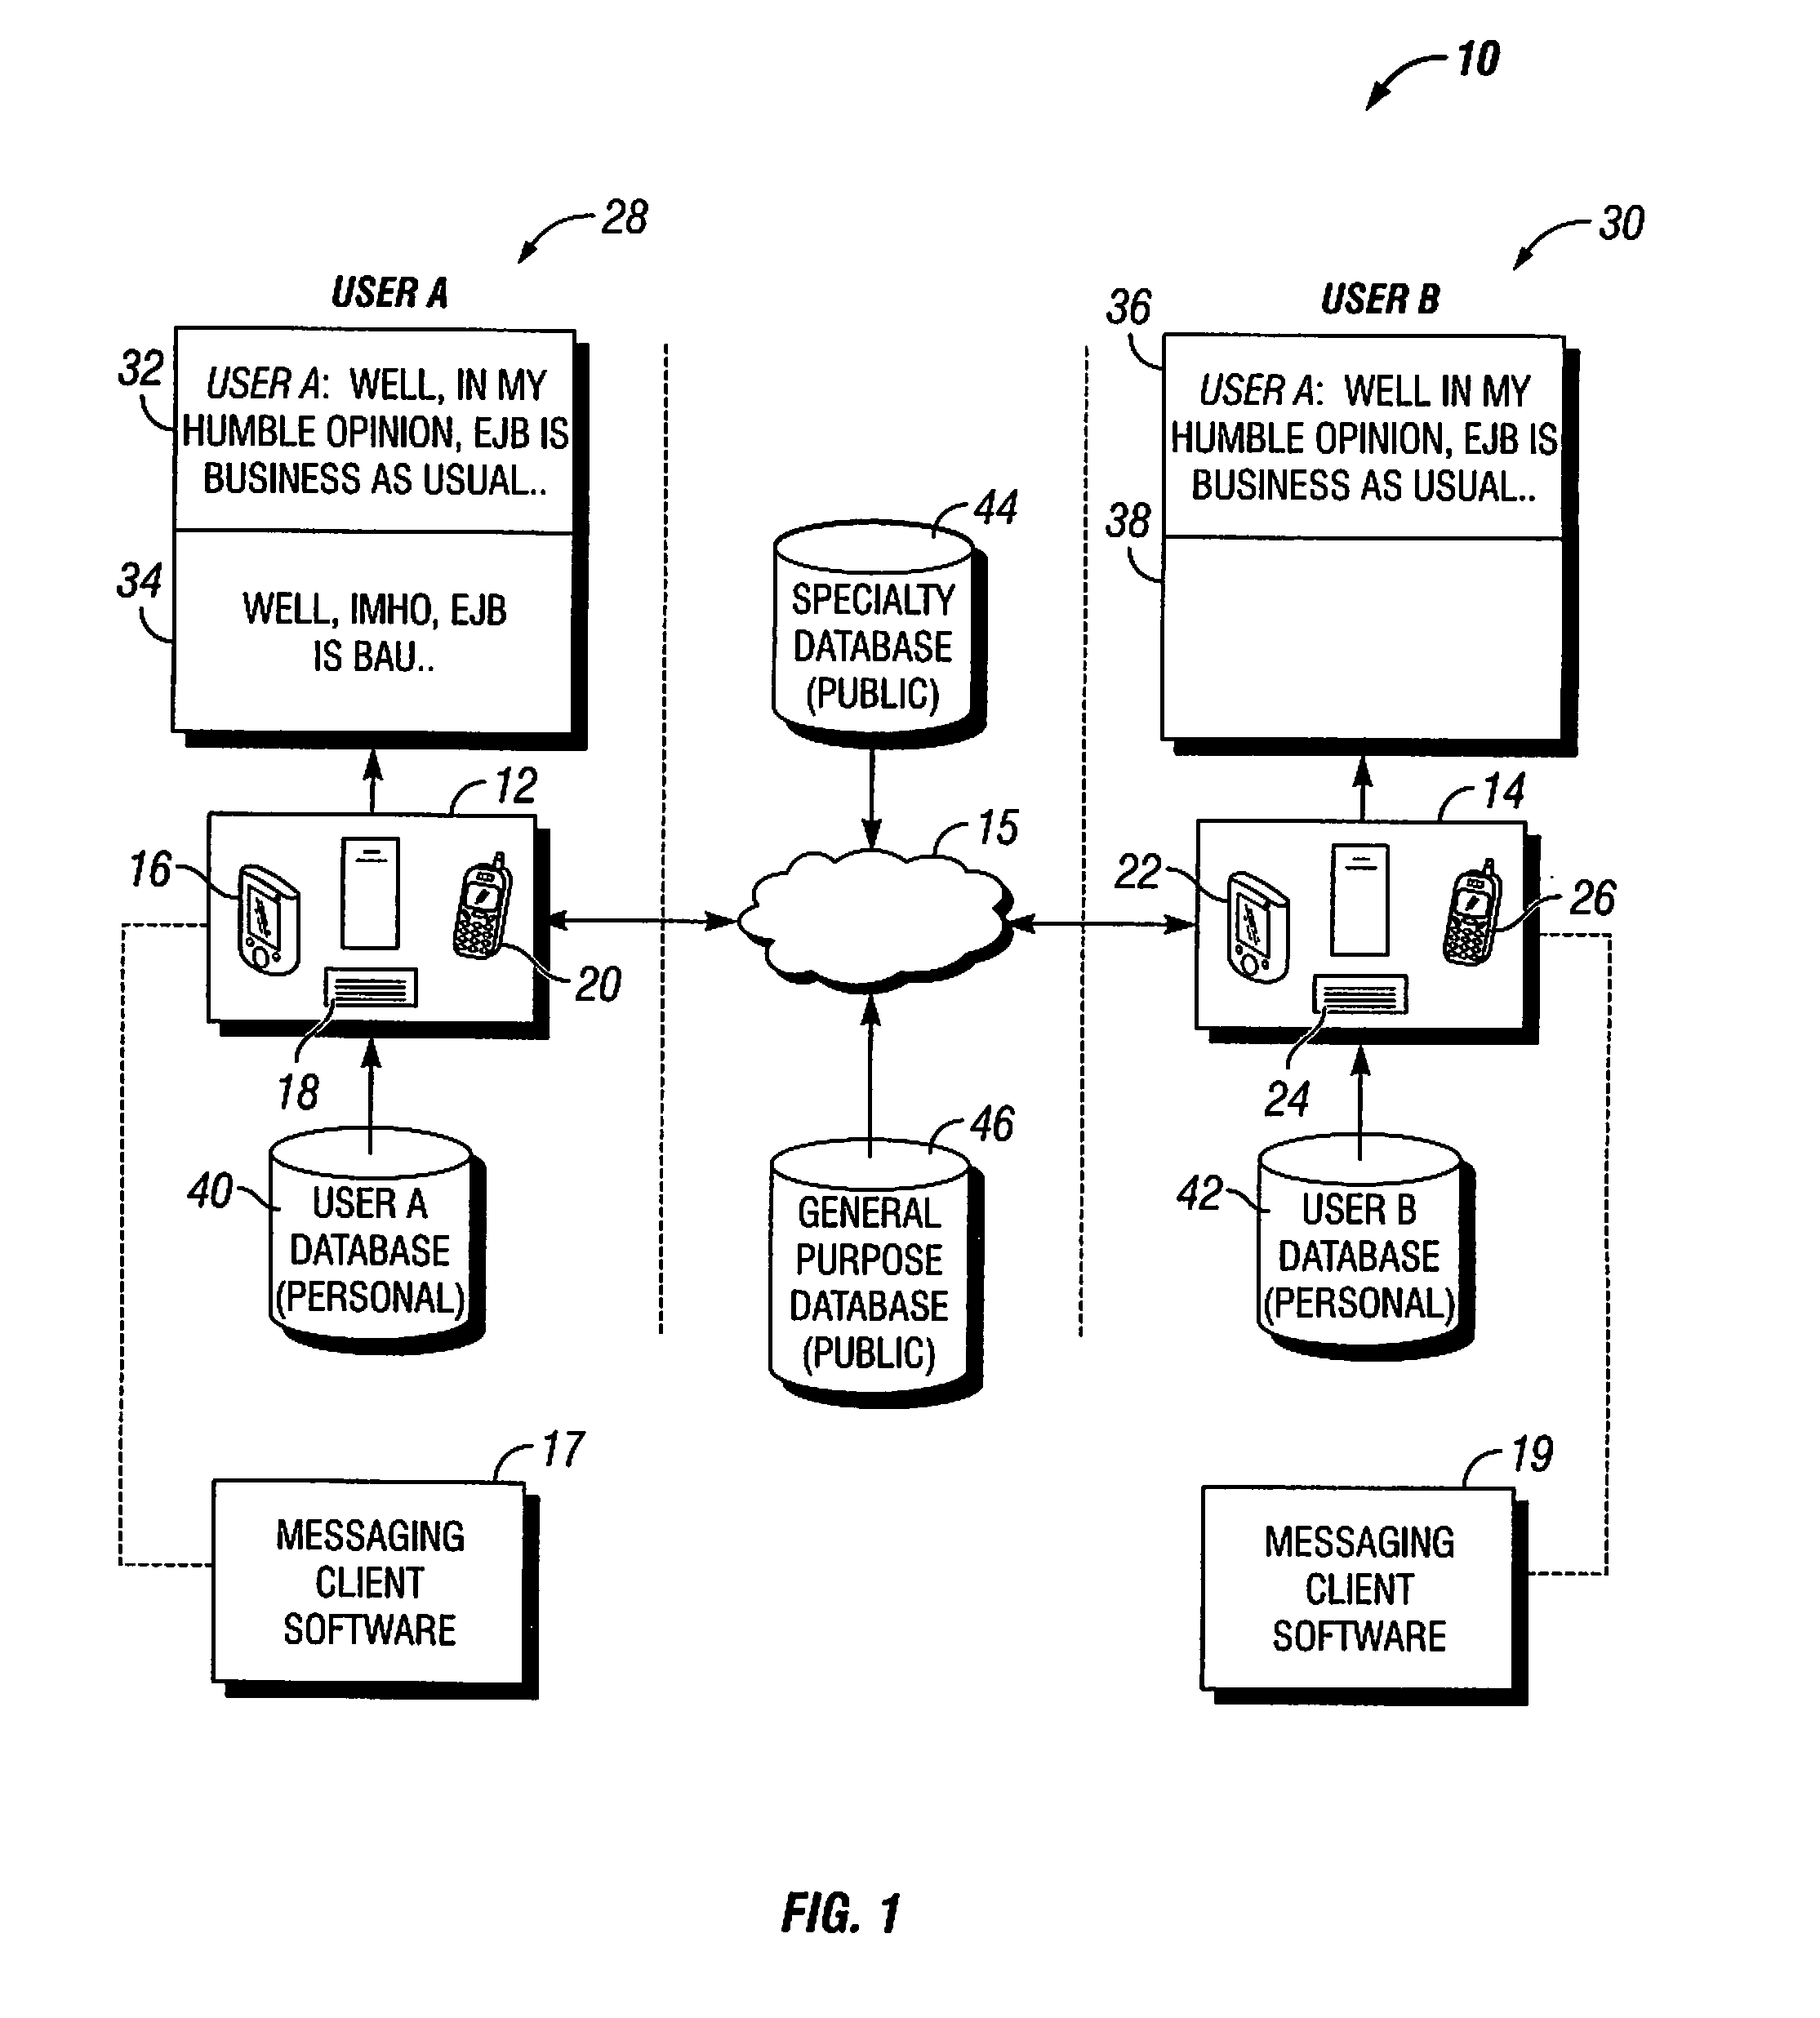 Resolution of abbreviated text in an electronic communications system